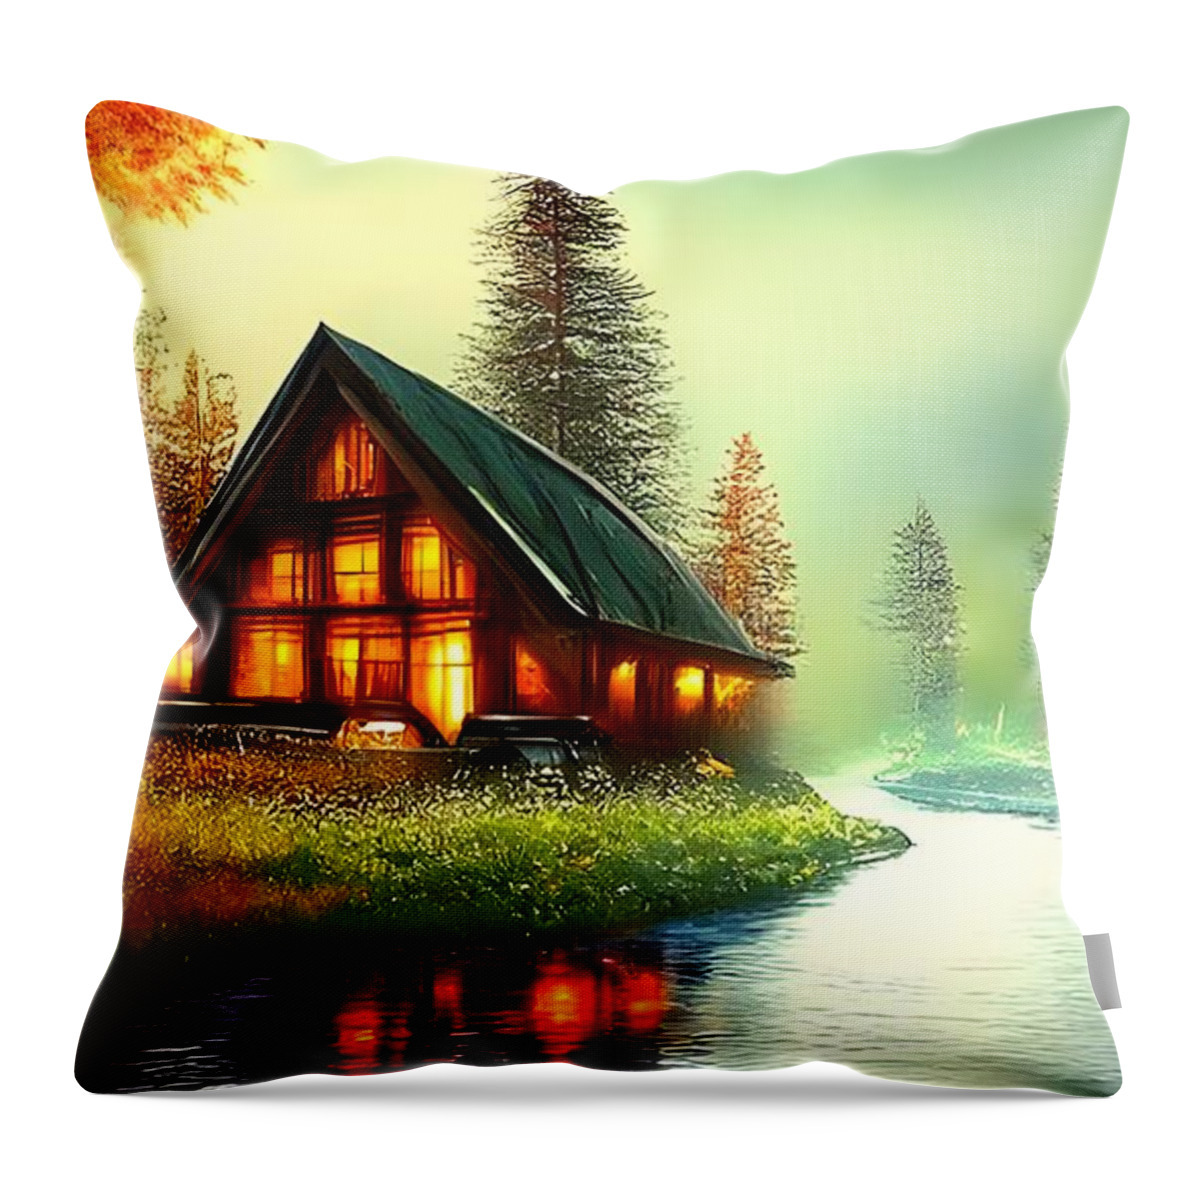 Digital Throw Pillow featuring the digital art Cabin on a River by Beverly Read